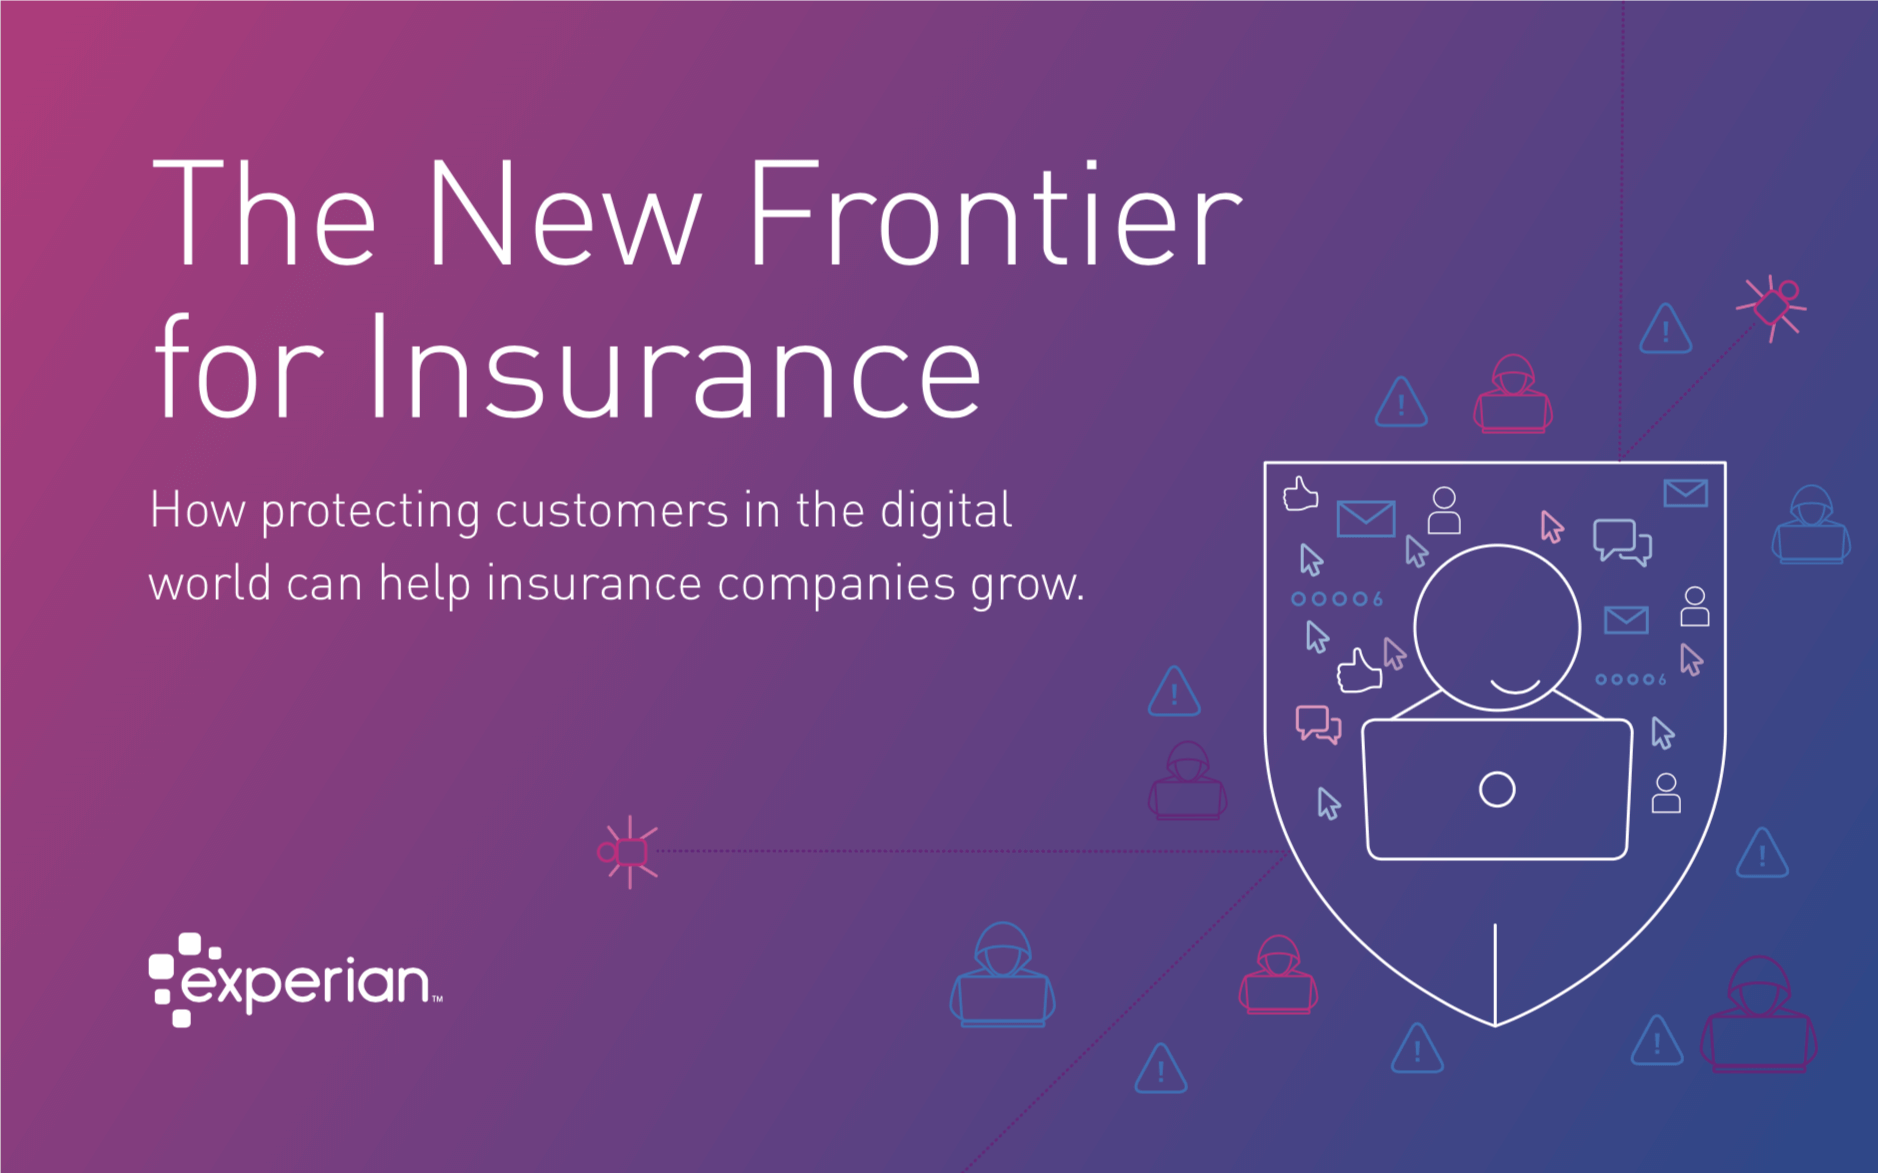 ebook-the-new-frontier-for-insurance